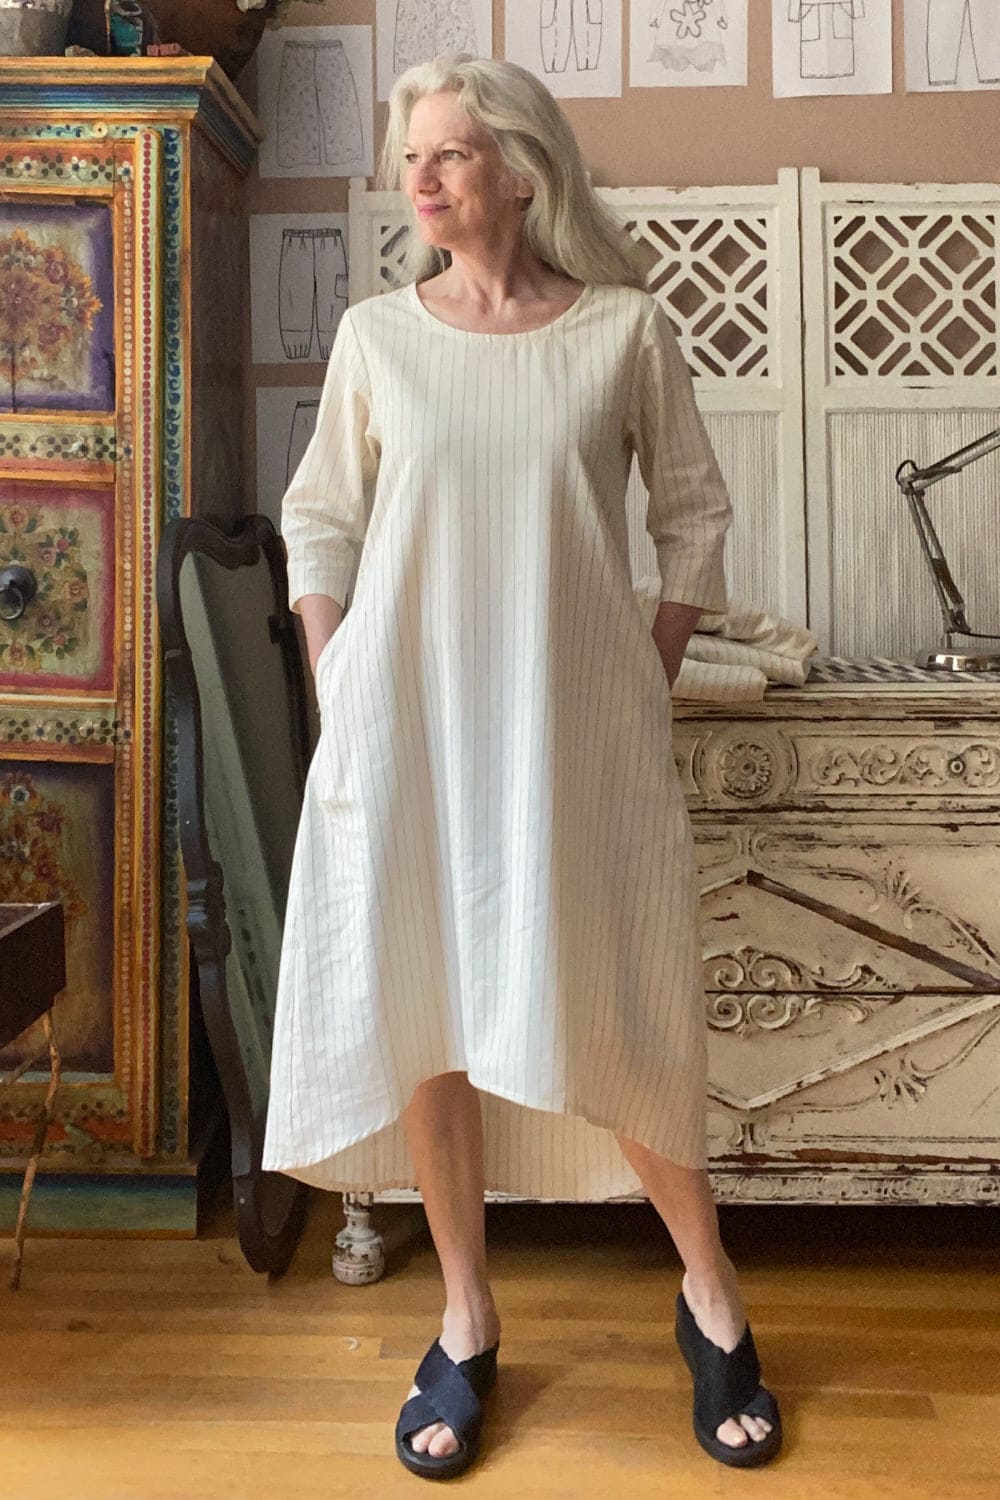 Creme color linen dress with a round neckline and curved hem.  Older woman with grey hair wearing also black sandles.